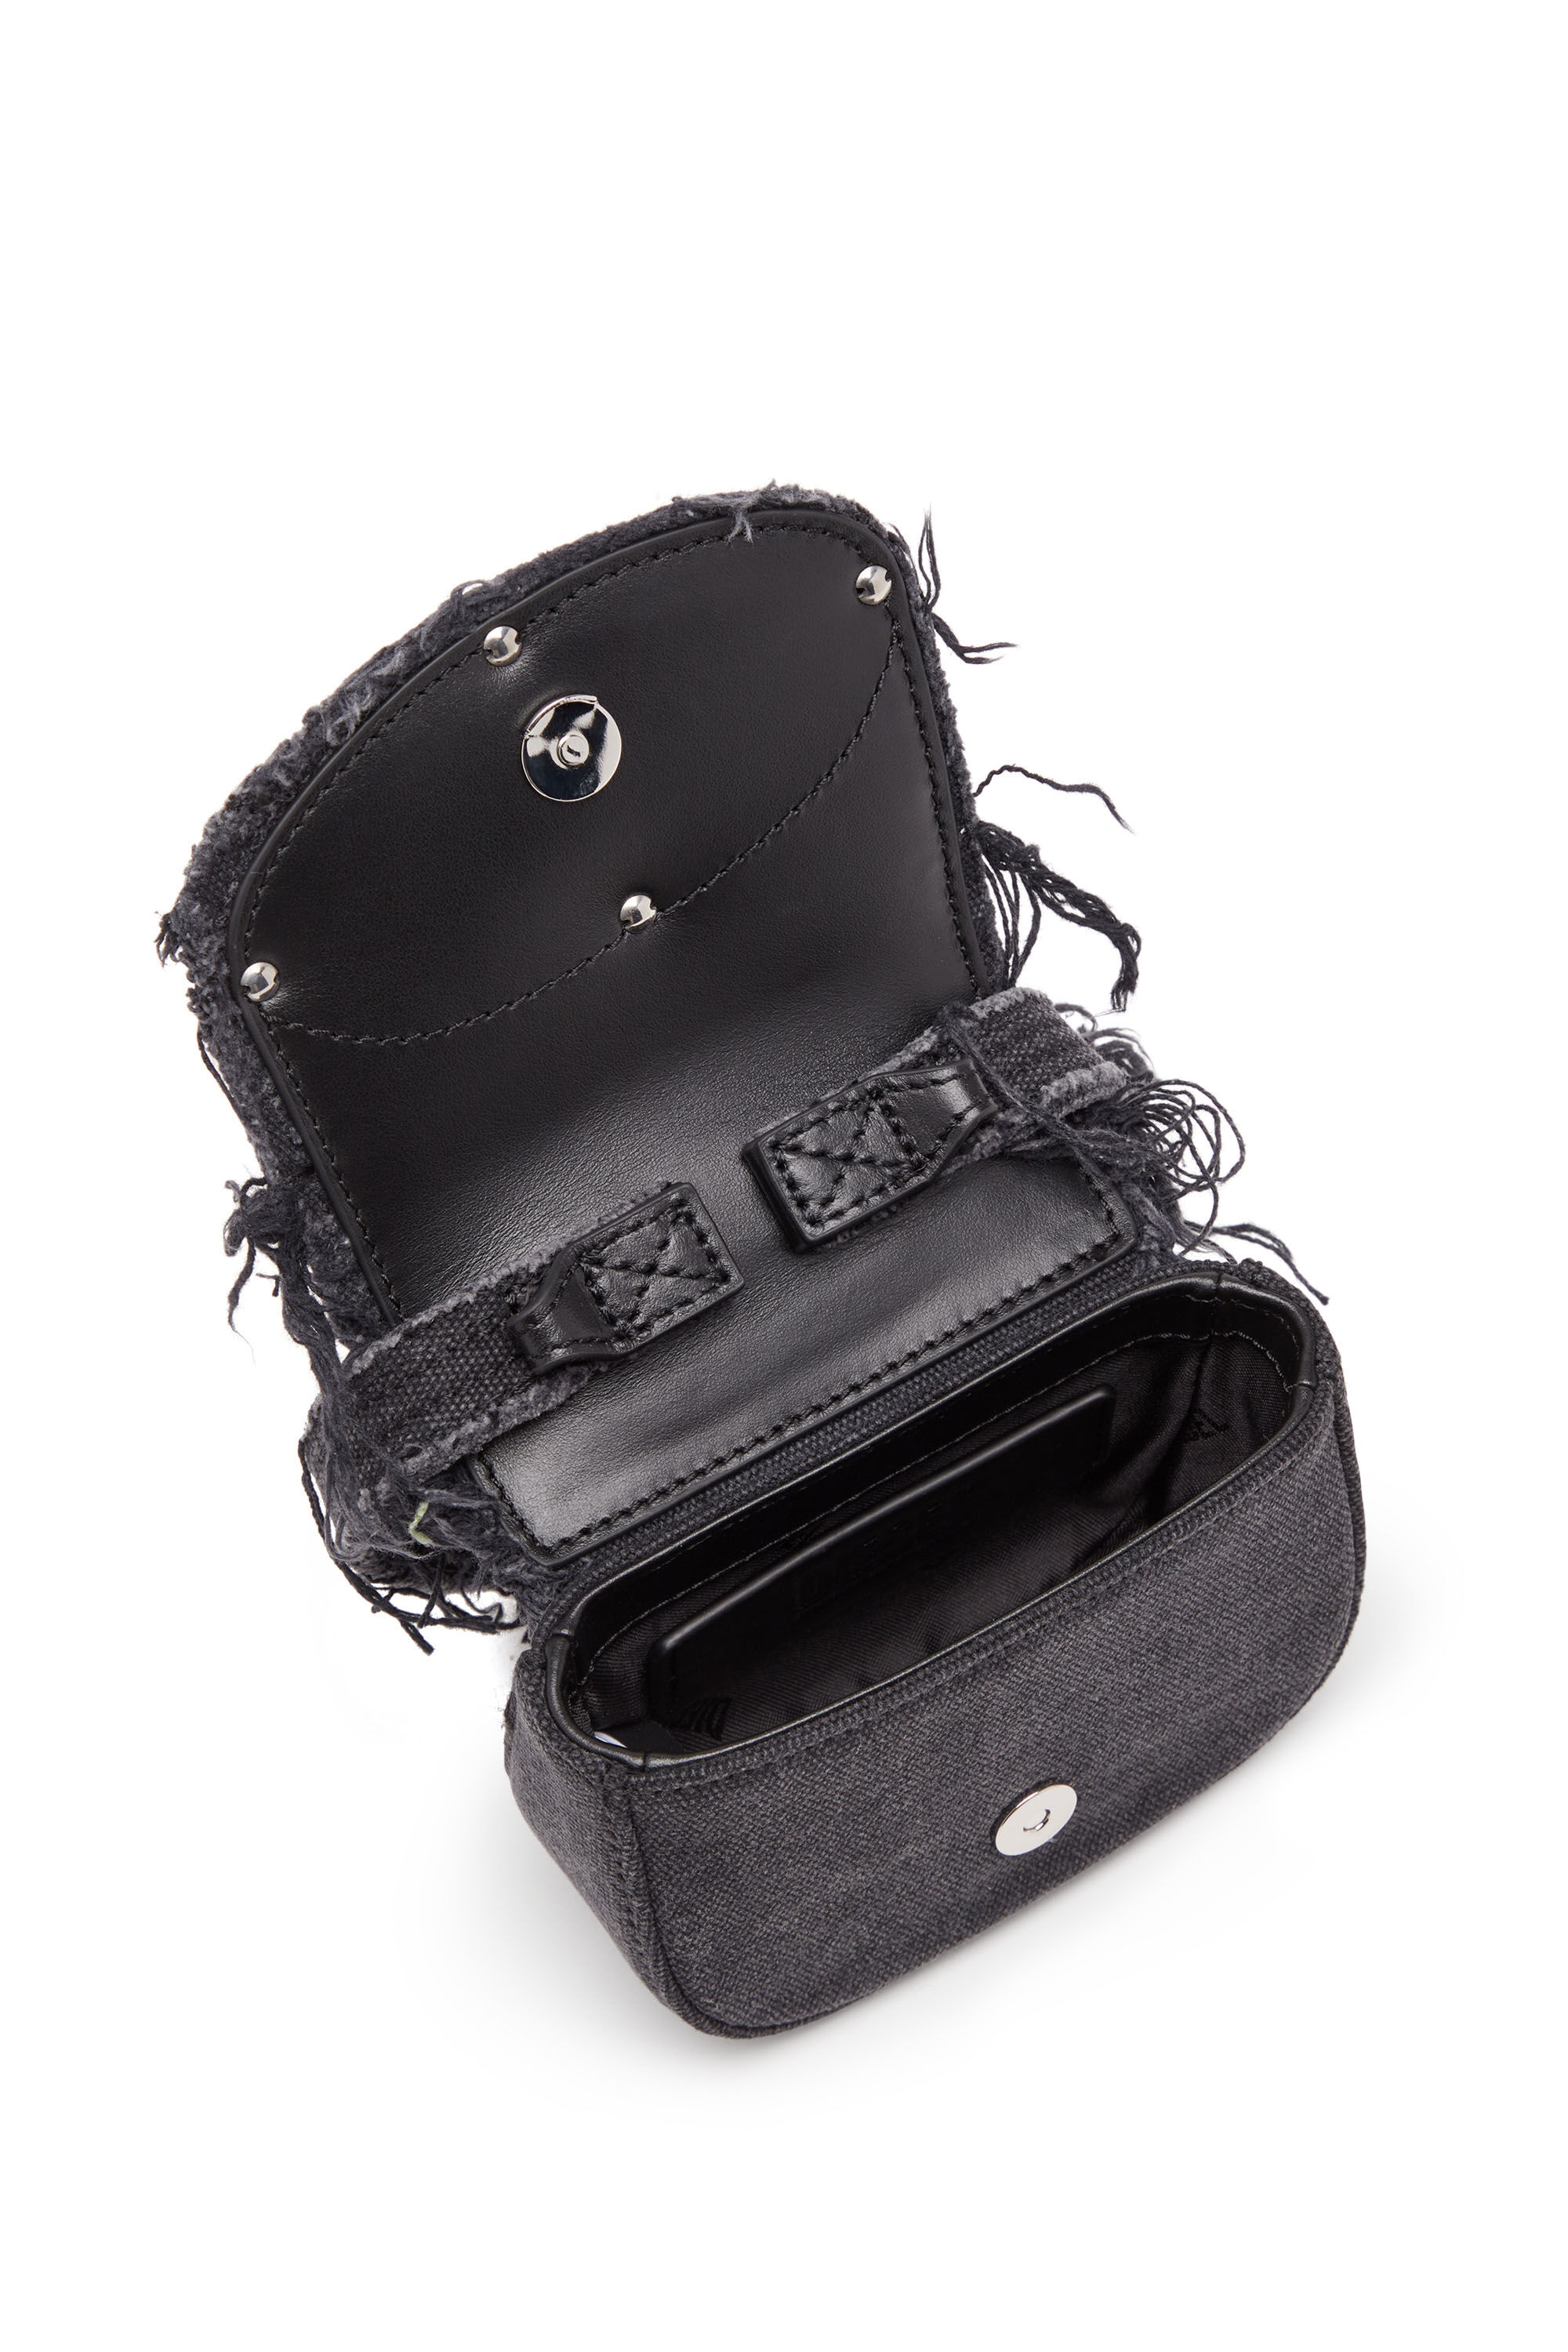 Diesel - 1DR XS, Woman 1DR XS-Iconic mini bag in canvas and leather in Black - Image 5